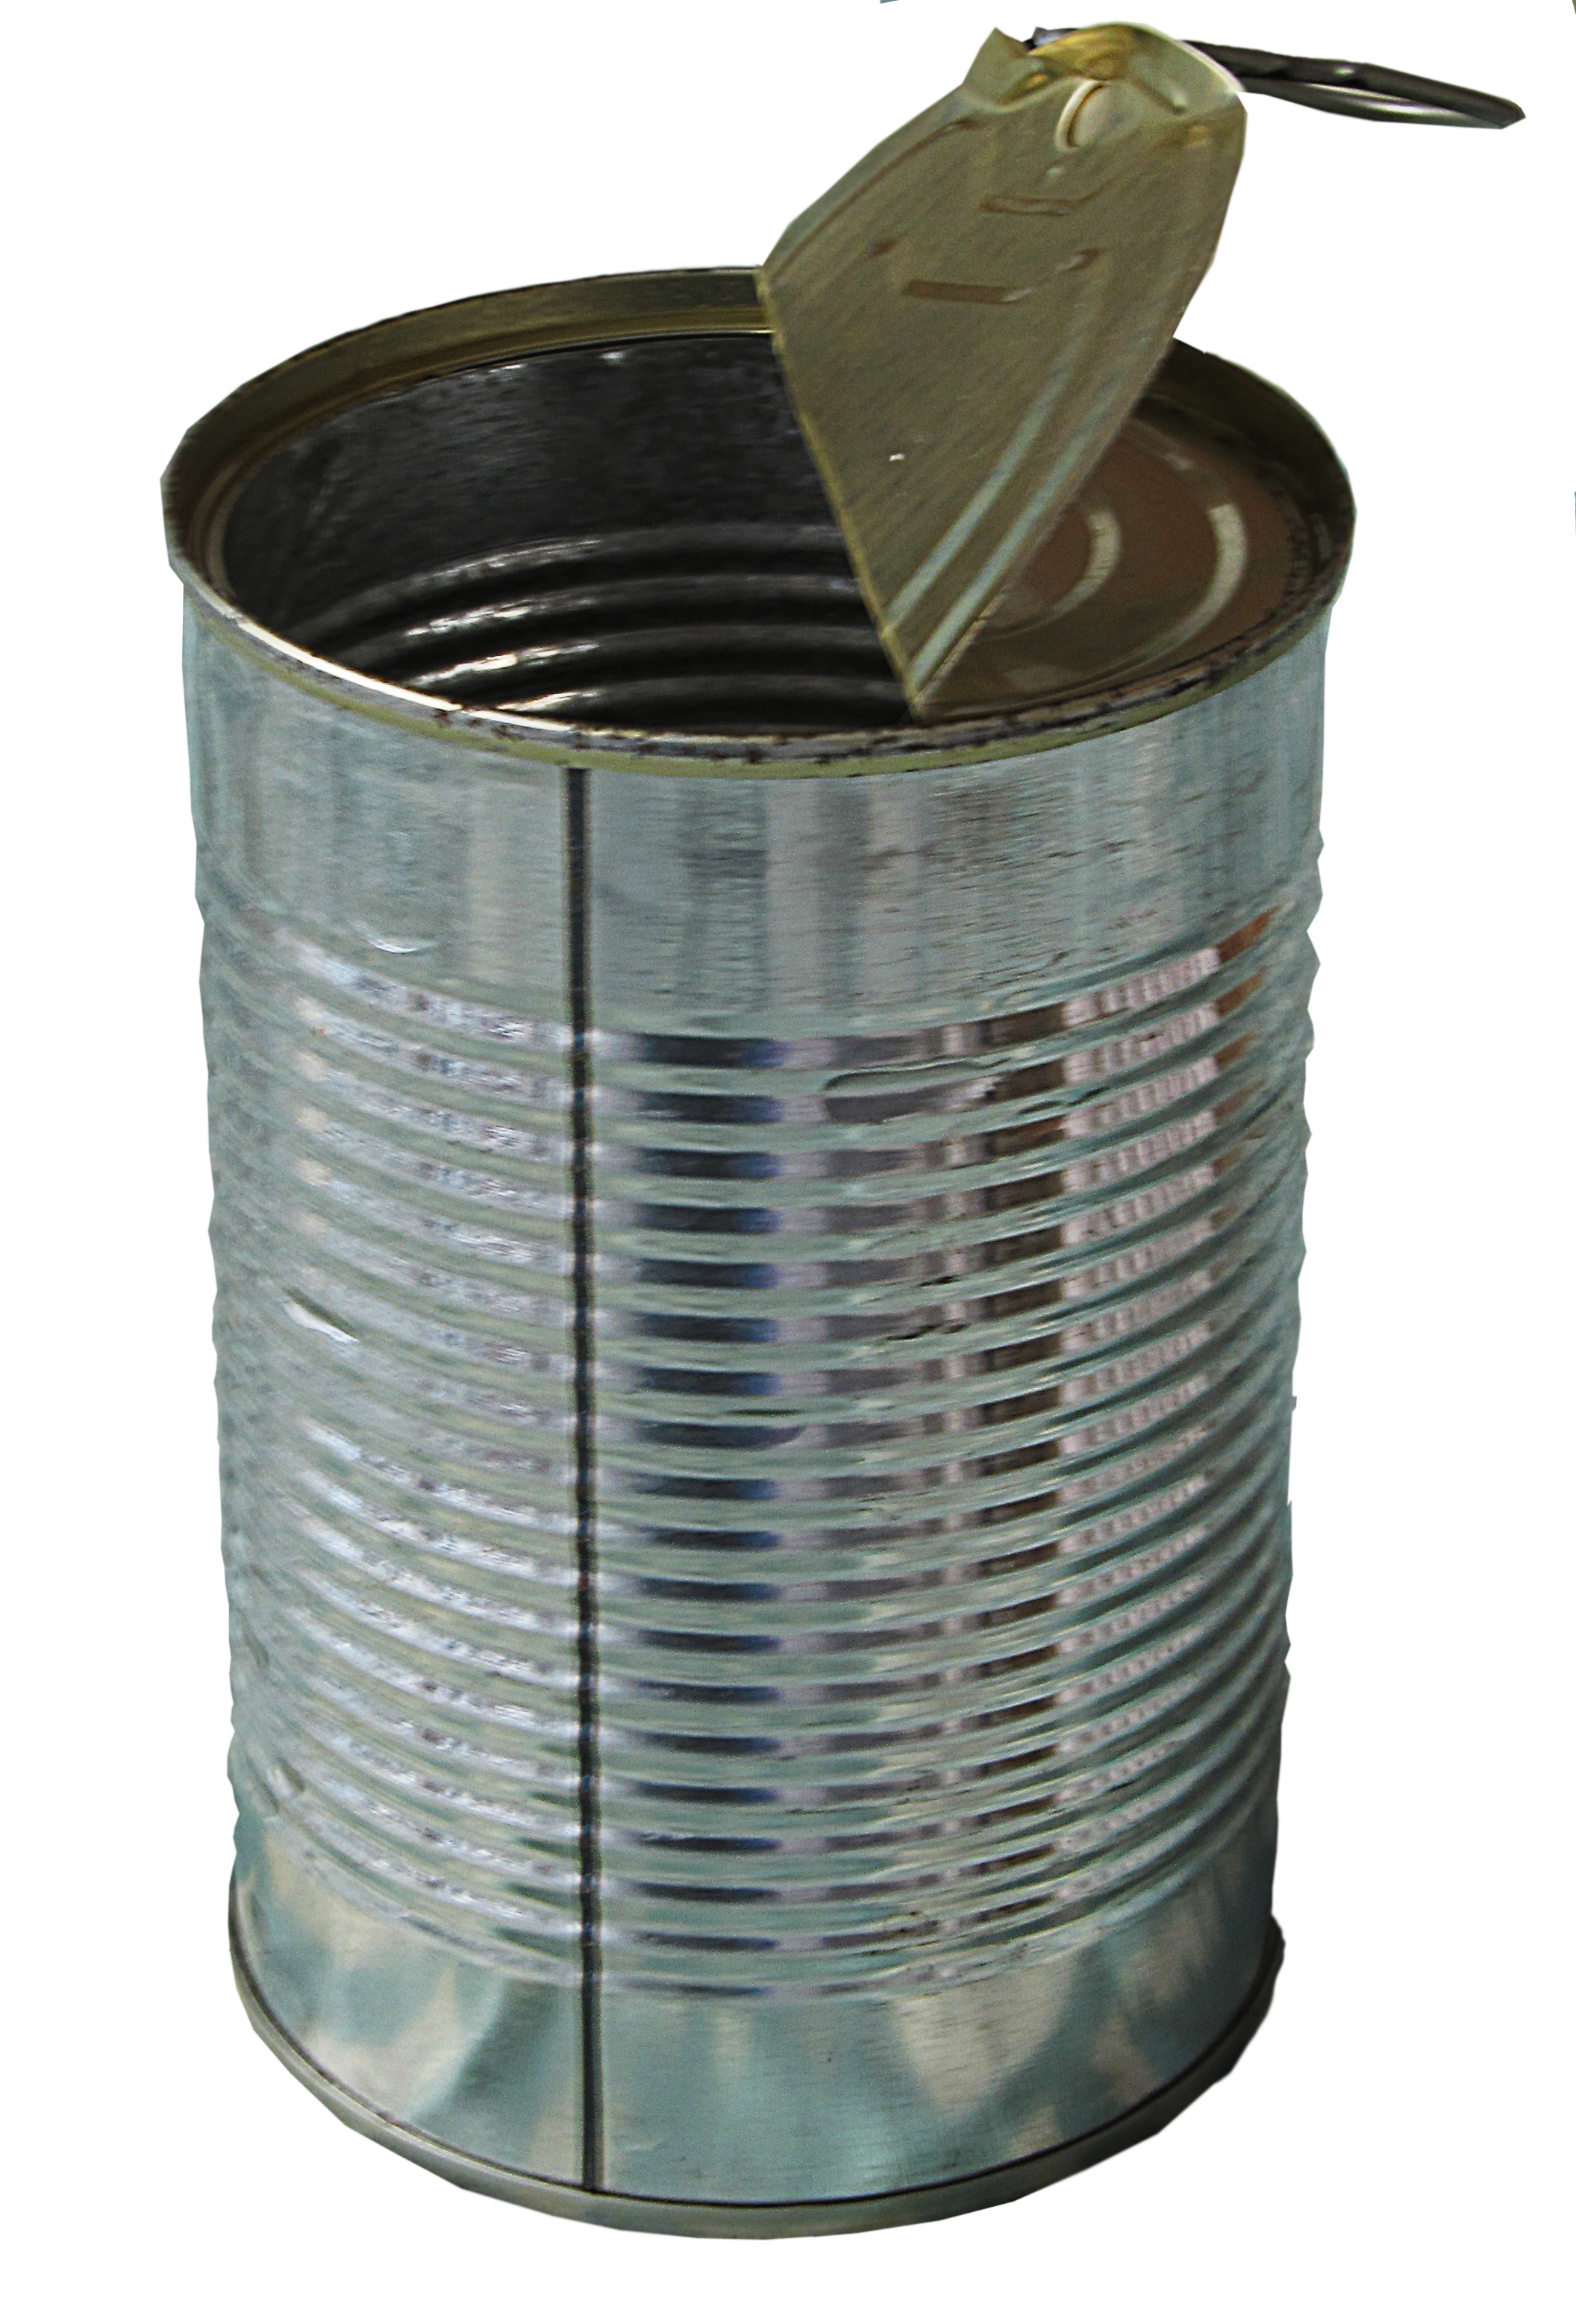 free-tin-can-cliparts-download-free-tin-can-cliparts-png-images-free